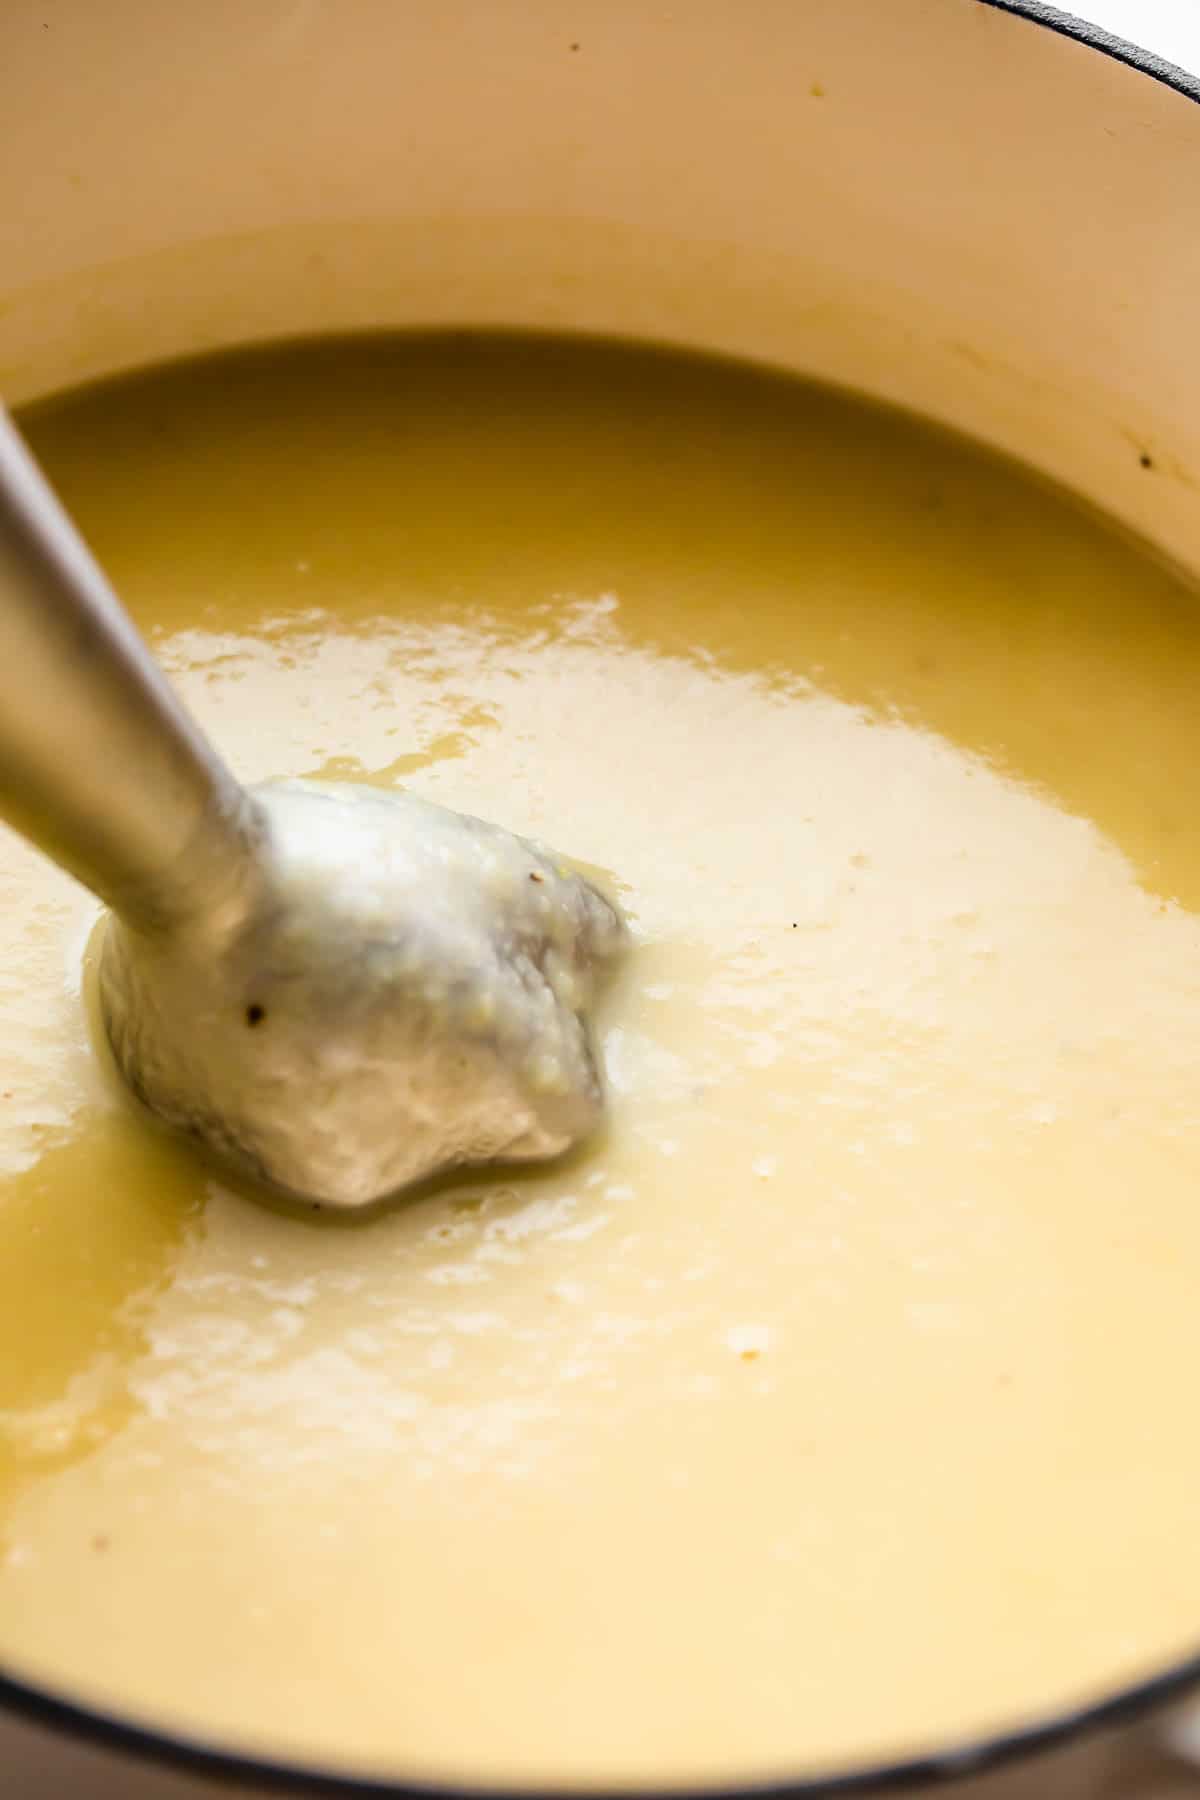 blending a creamy potato and leek soup with a handheld immersion blender.